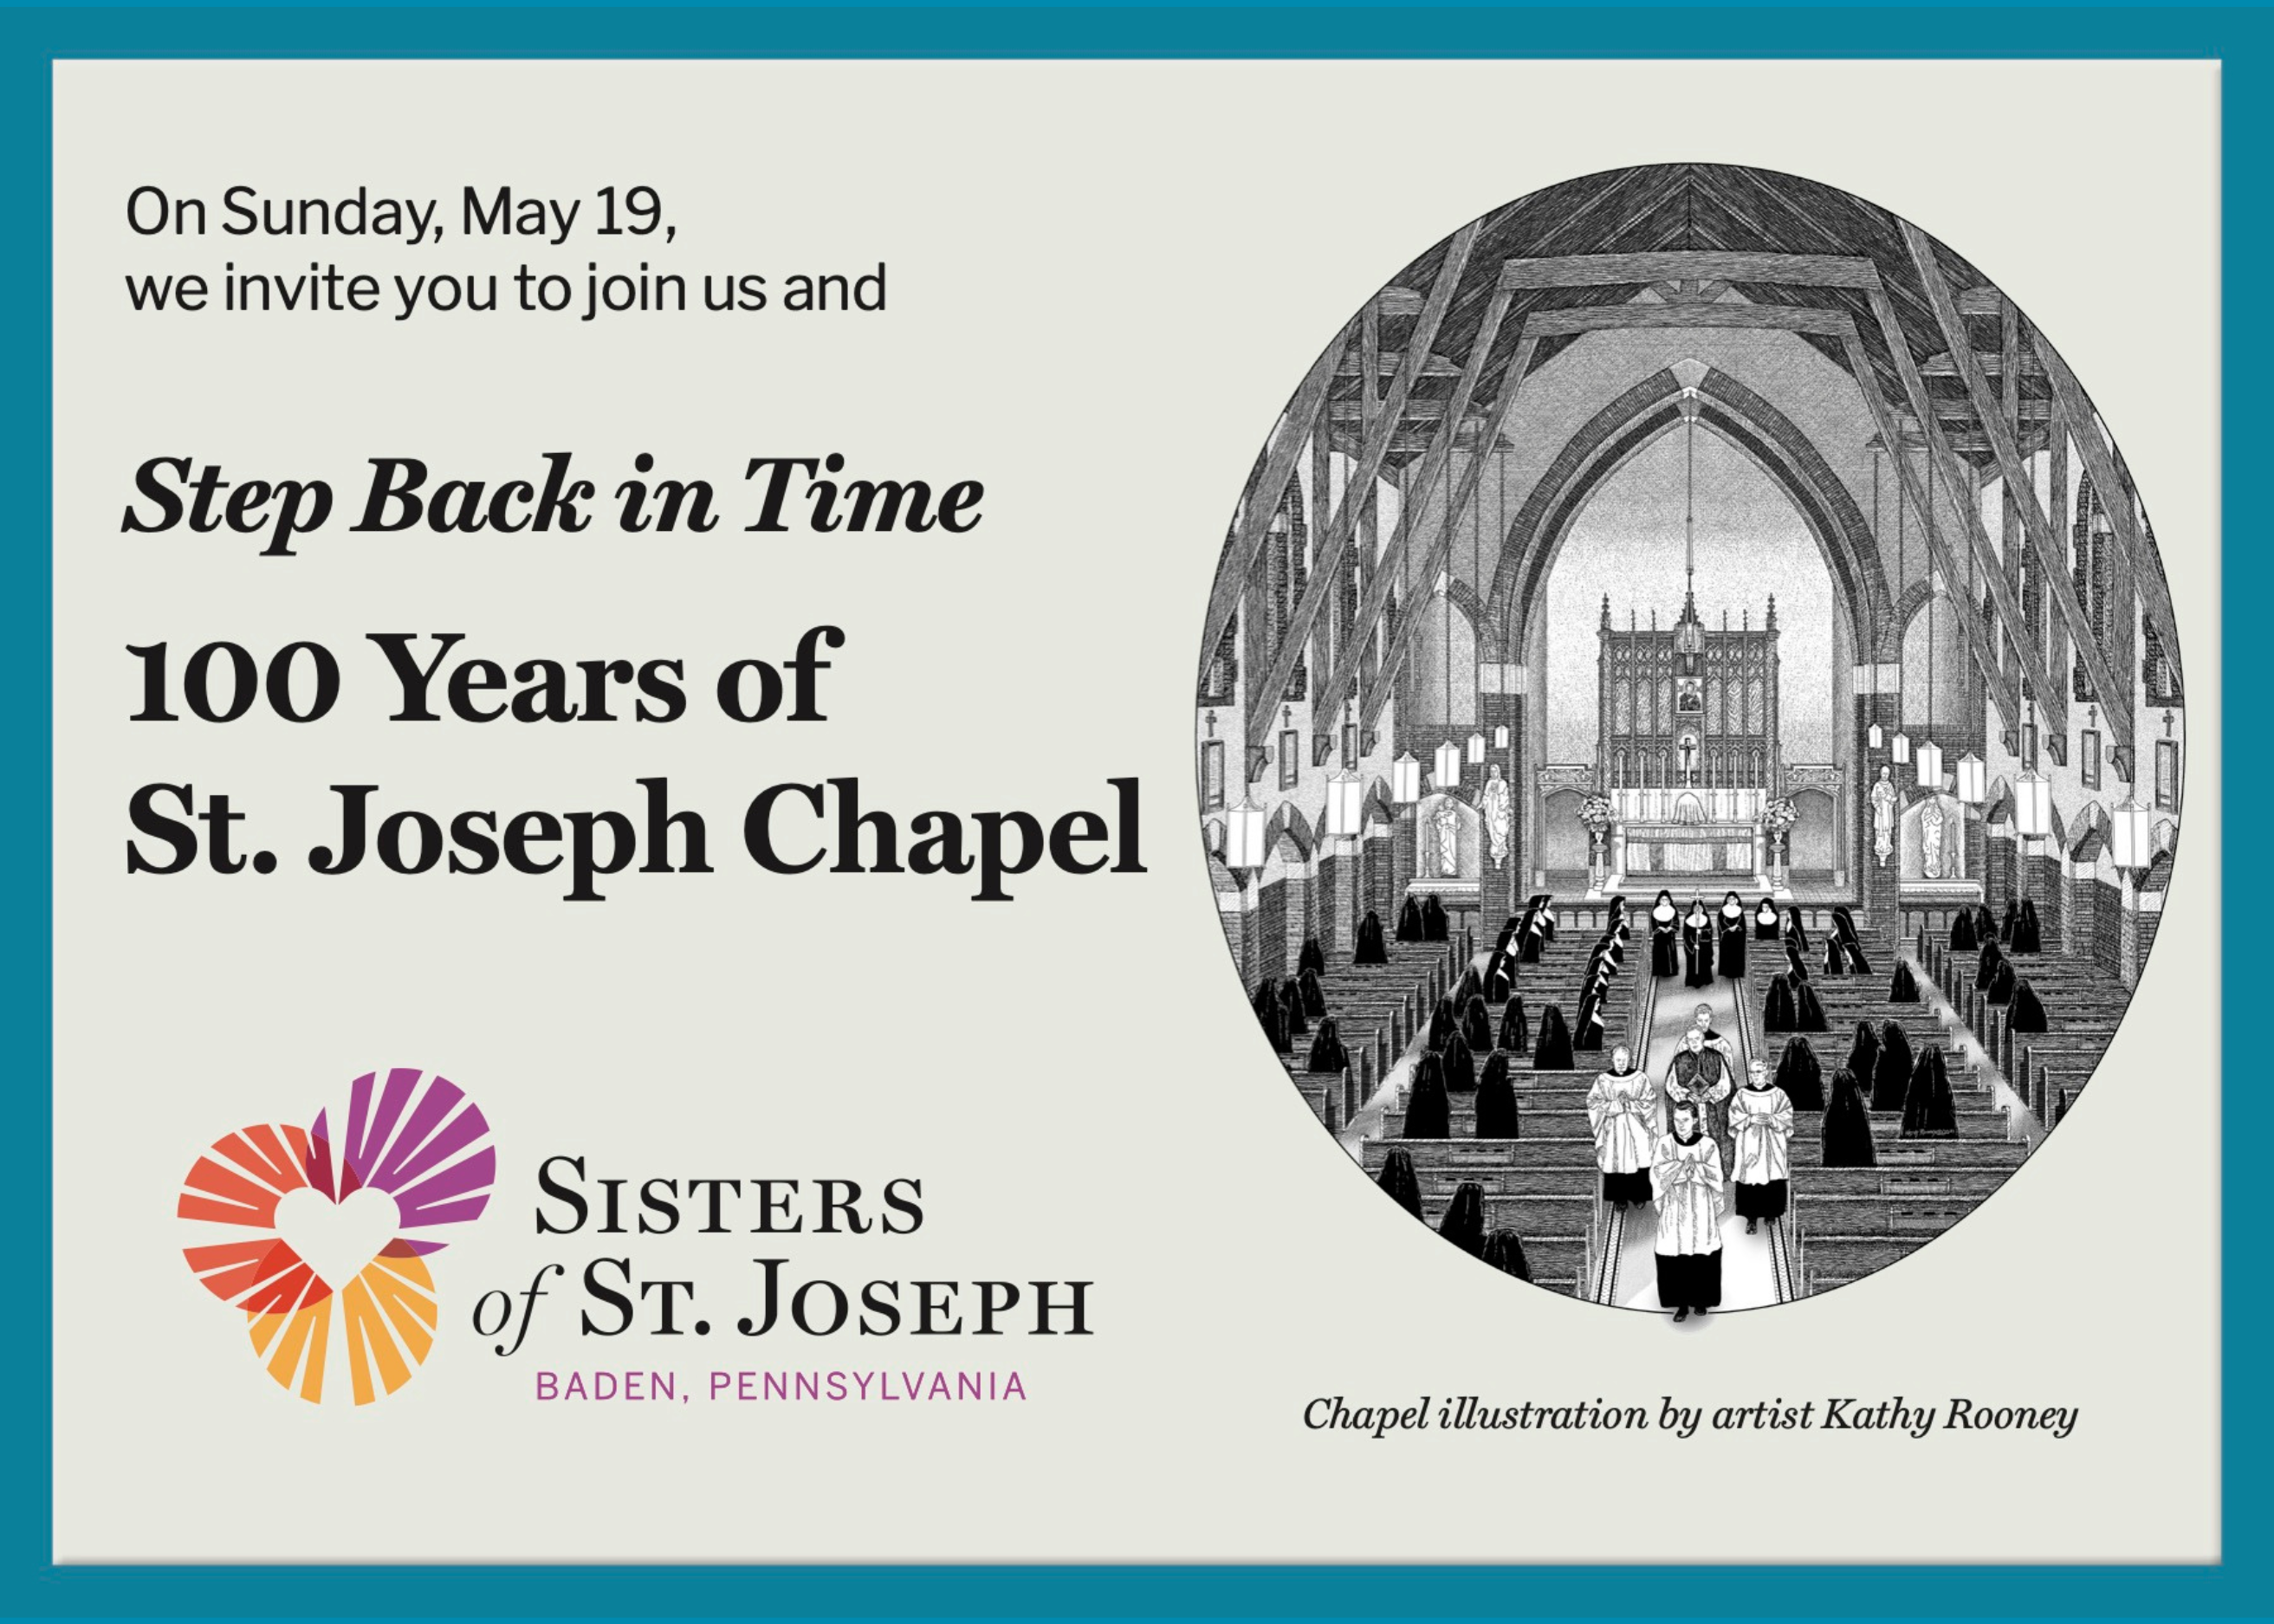 Step Back in Time: 100 Years of St. Joseph Chapel